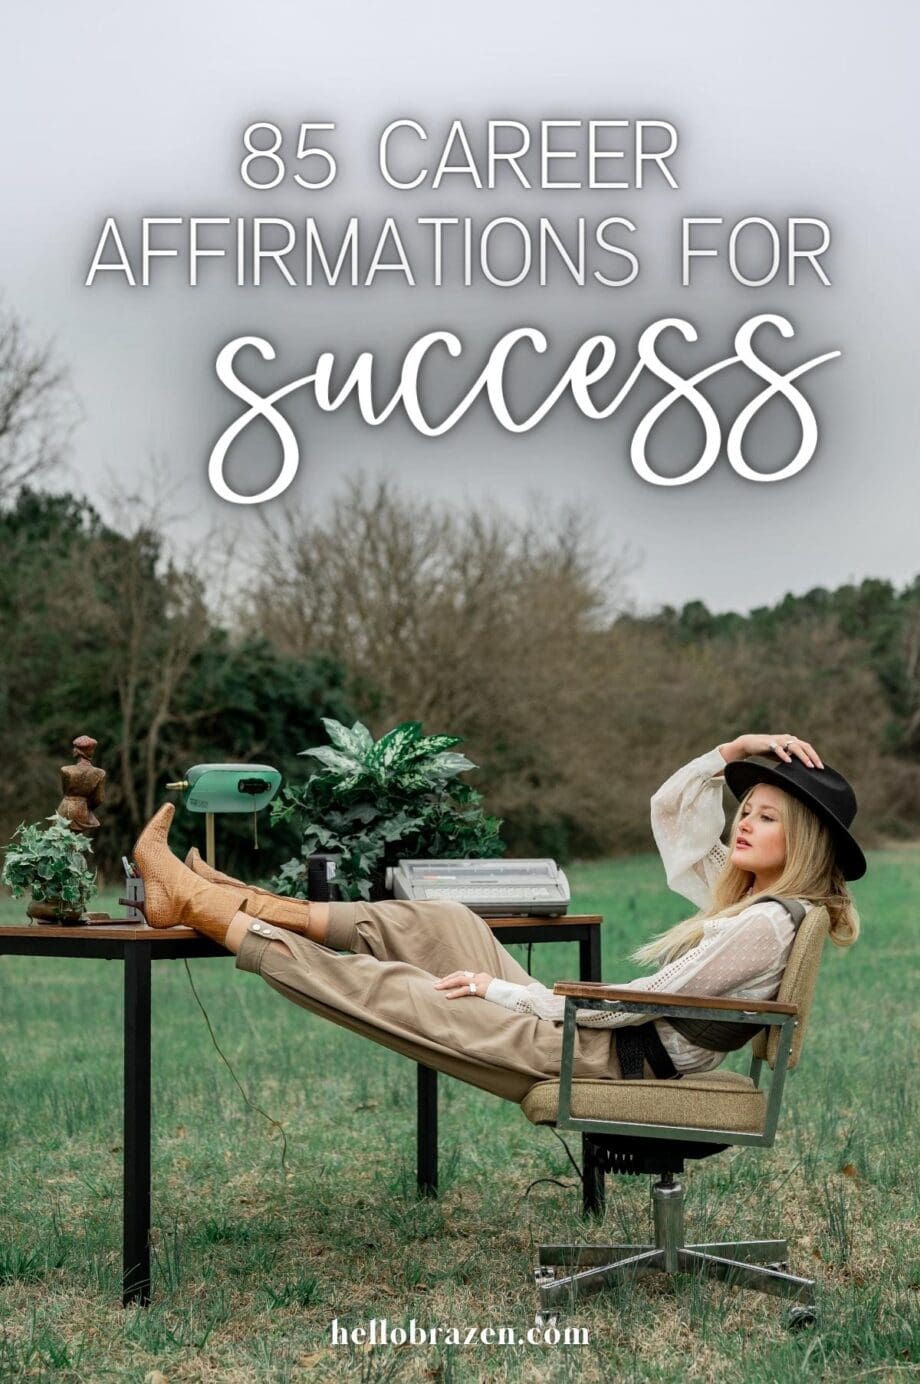 Improve your career prospects with daily career affirmations! Enhance your positive attitude, boost your self-worth, and achieve personal growth.